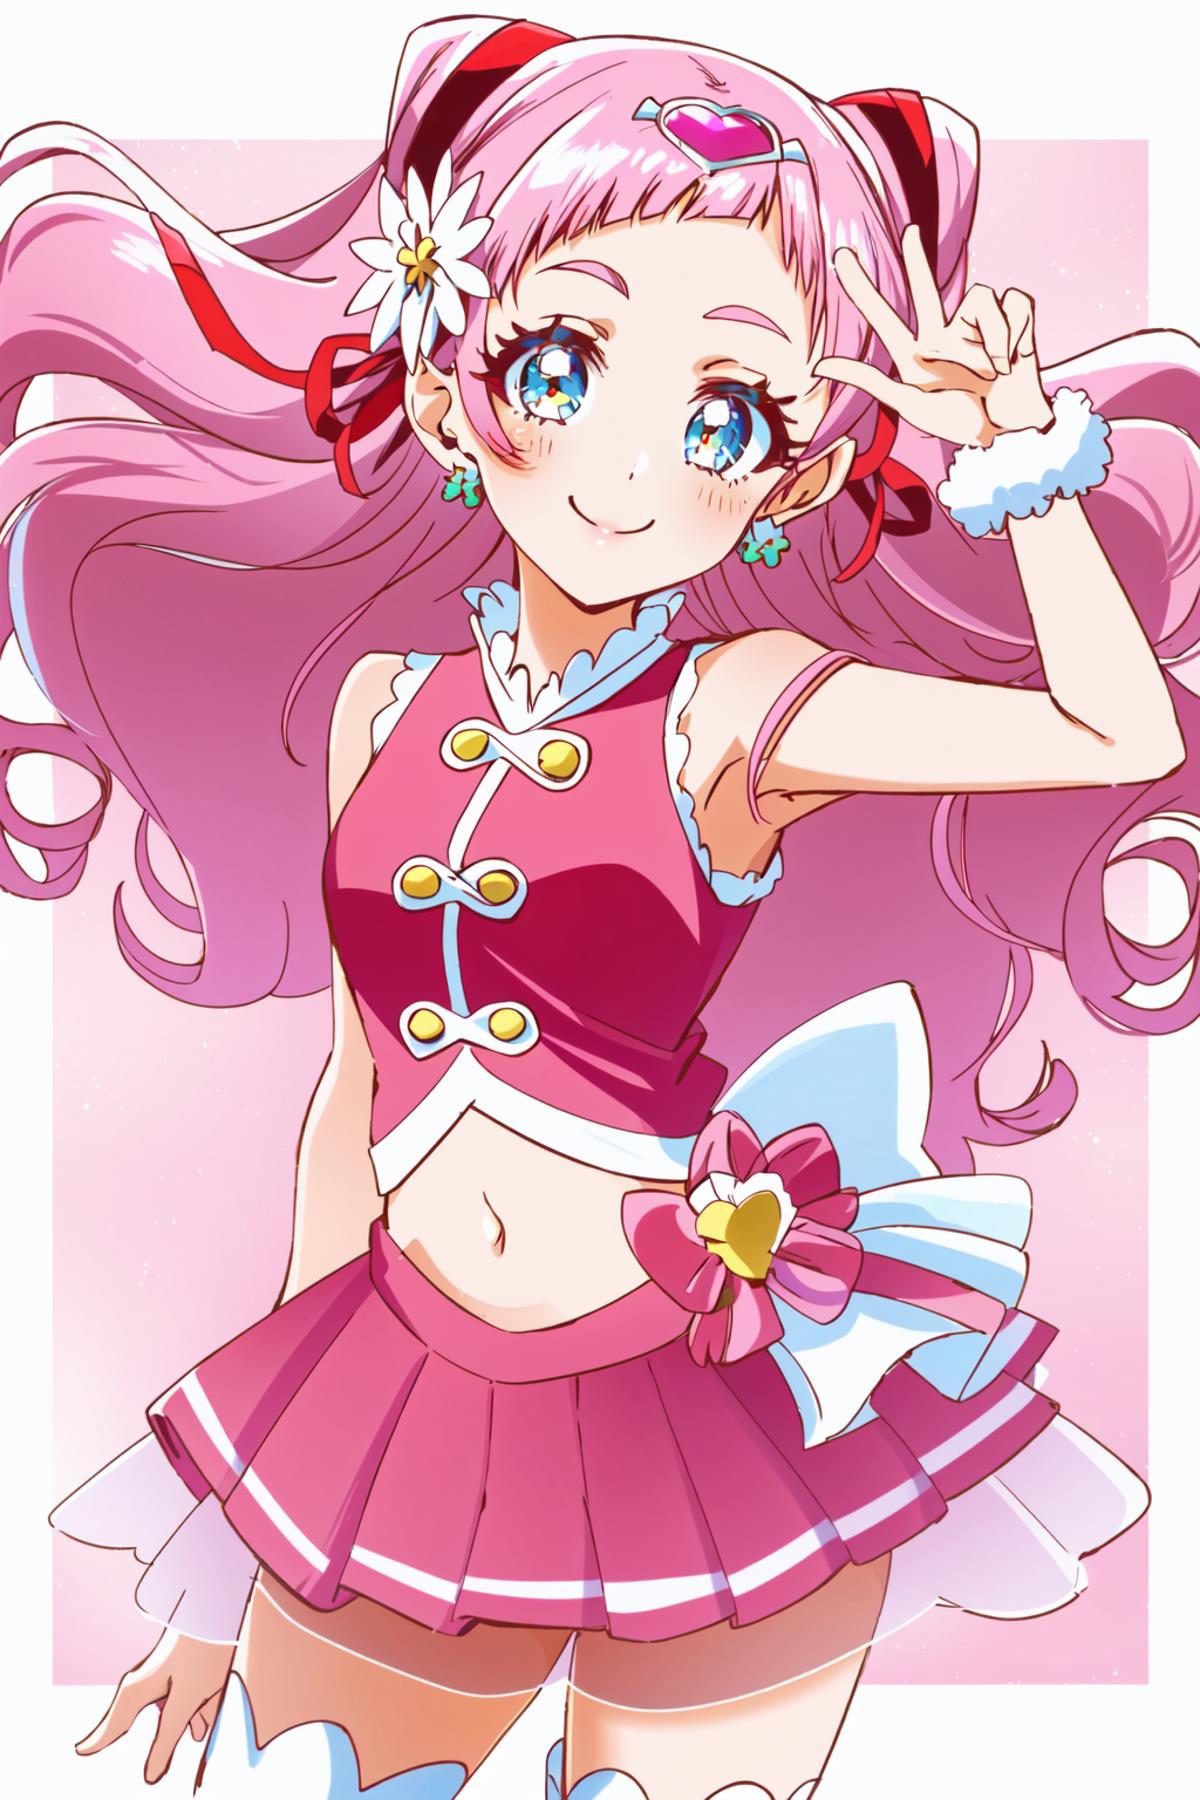 Cure Yell -Precure Series- / キュアエール（HUGっと！プリキュア） image by misspixel